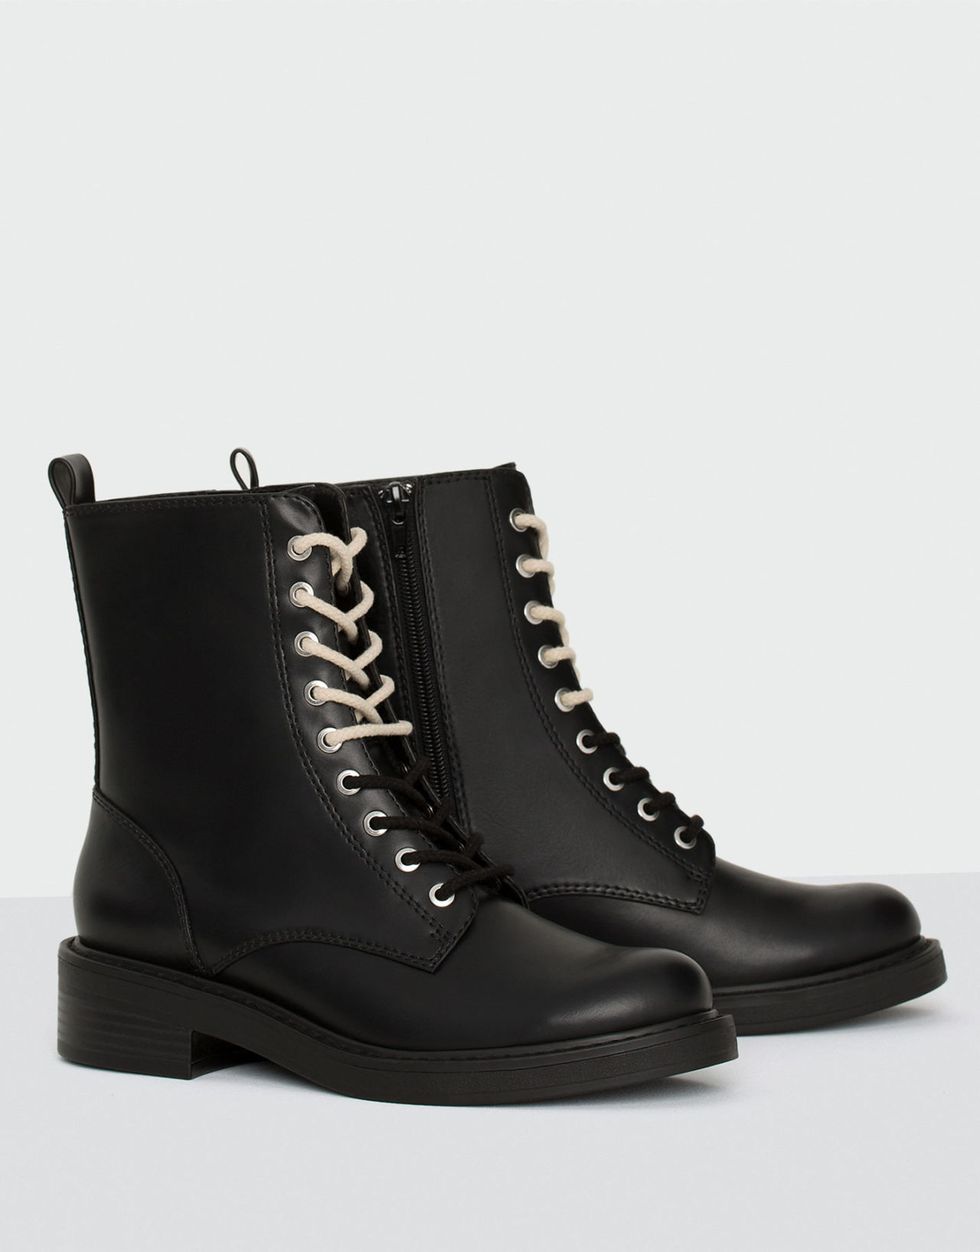 Footwear, Boot, Shoe, White, Leather, Black, Work boots, Steel-toe boot, Brand, Motorcycle boot, 